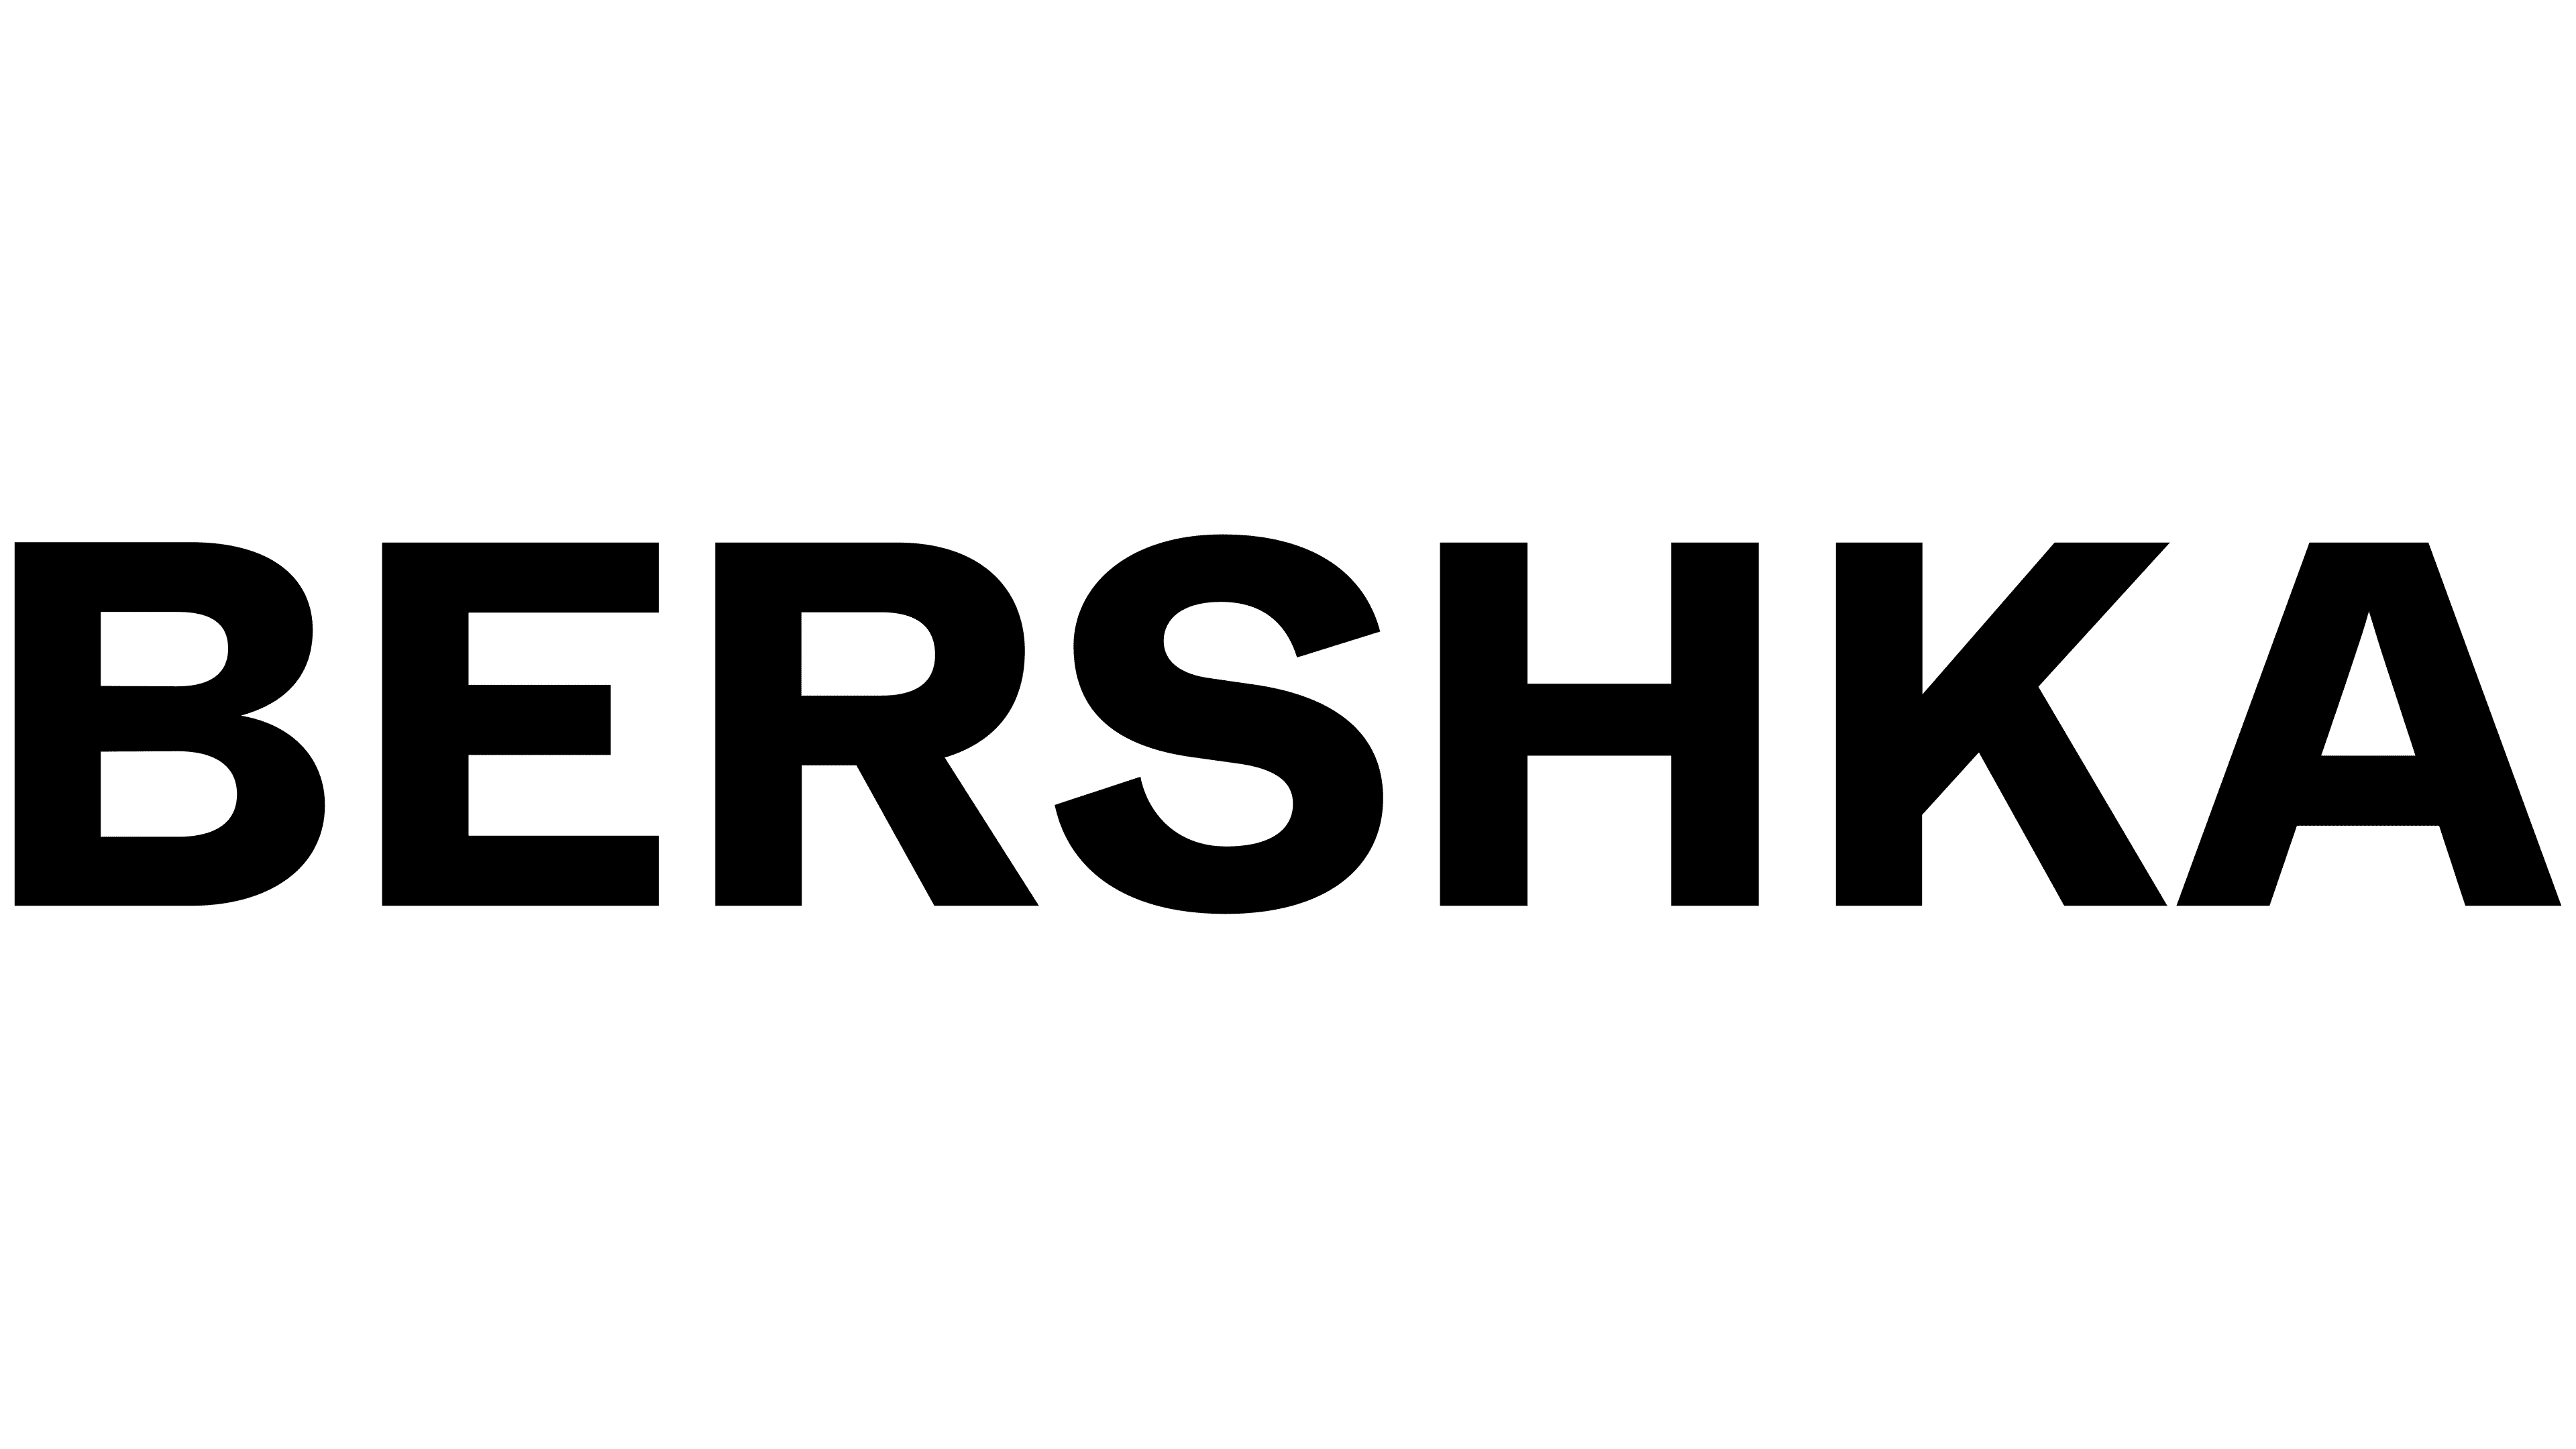 Bershka meaning, history, PNG, brand